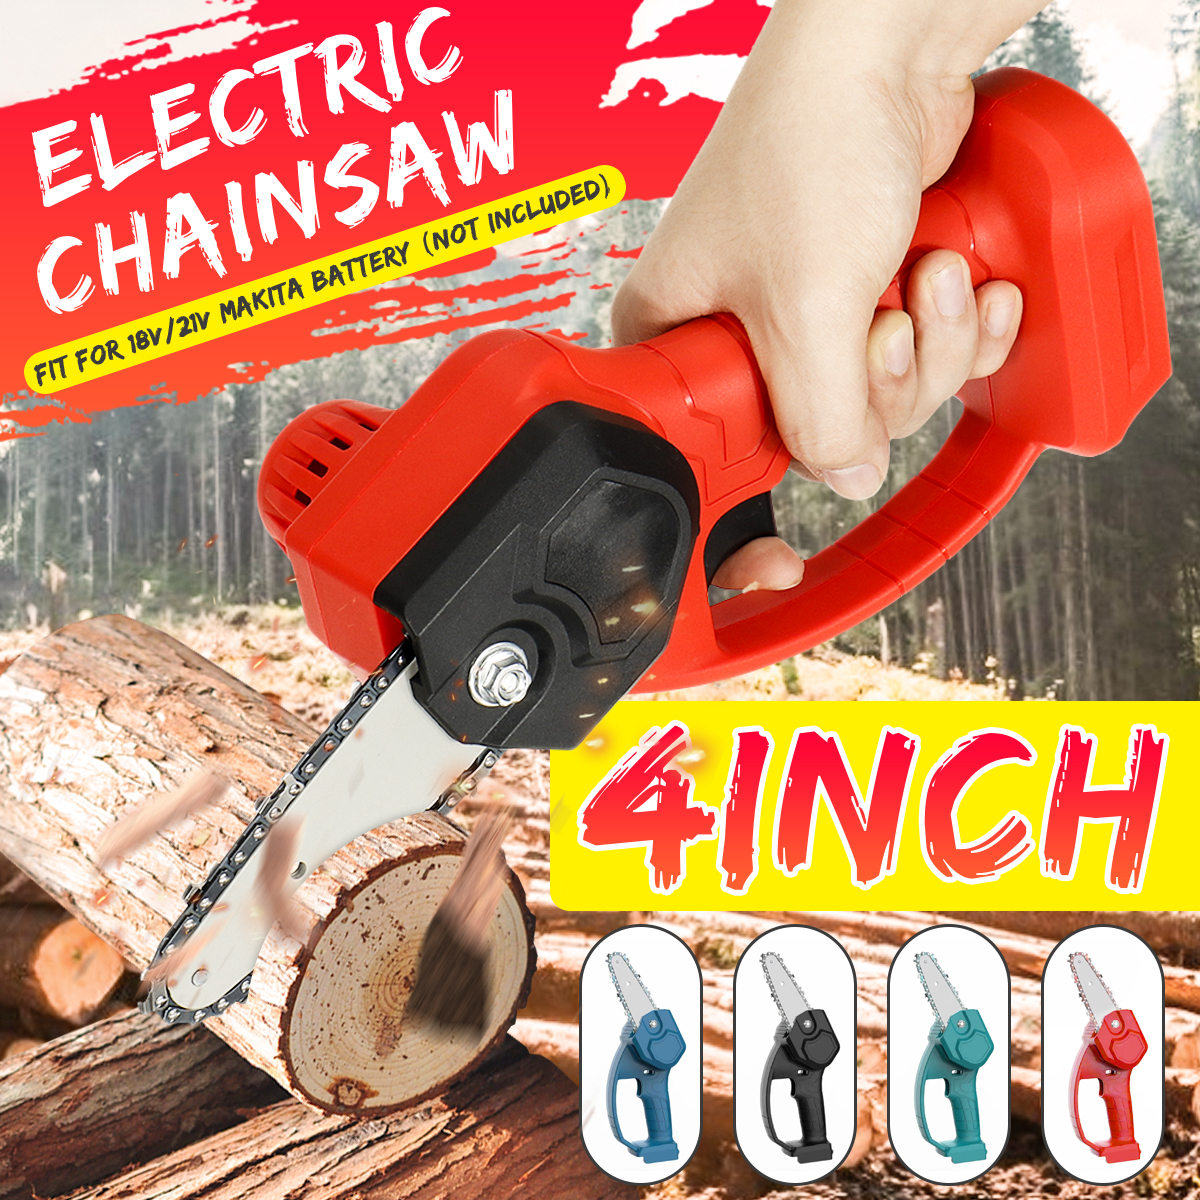 550W-4-Mini-Cordless-One-Hand-Saw-Woodworking-Electric-Chain-Saw-Wood-Cutter-For-Makita-18V21V-Batte-1784797-1